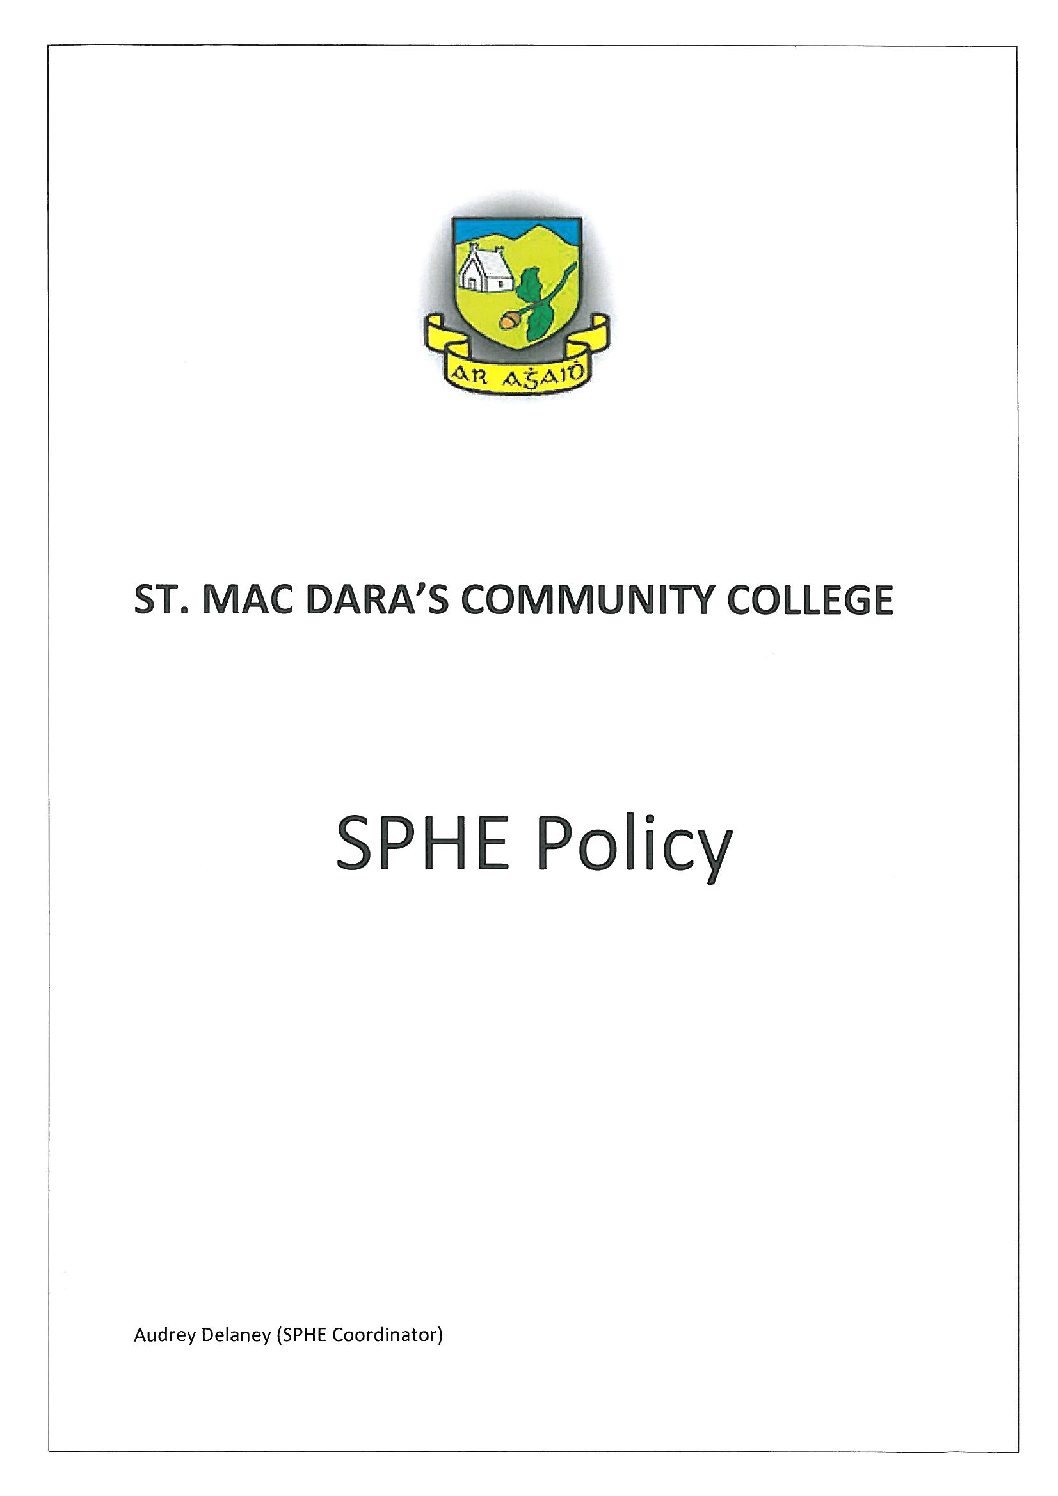 SPHE (Social, Personal and Health Education) Policy